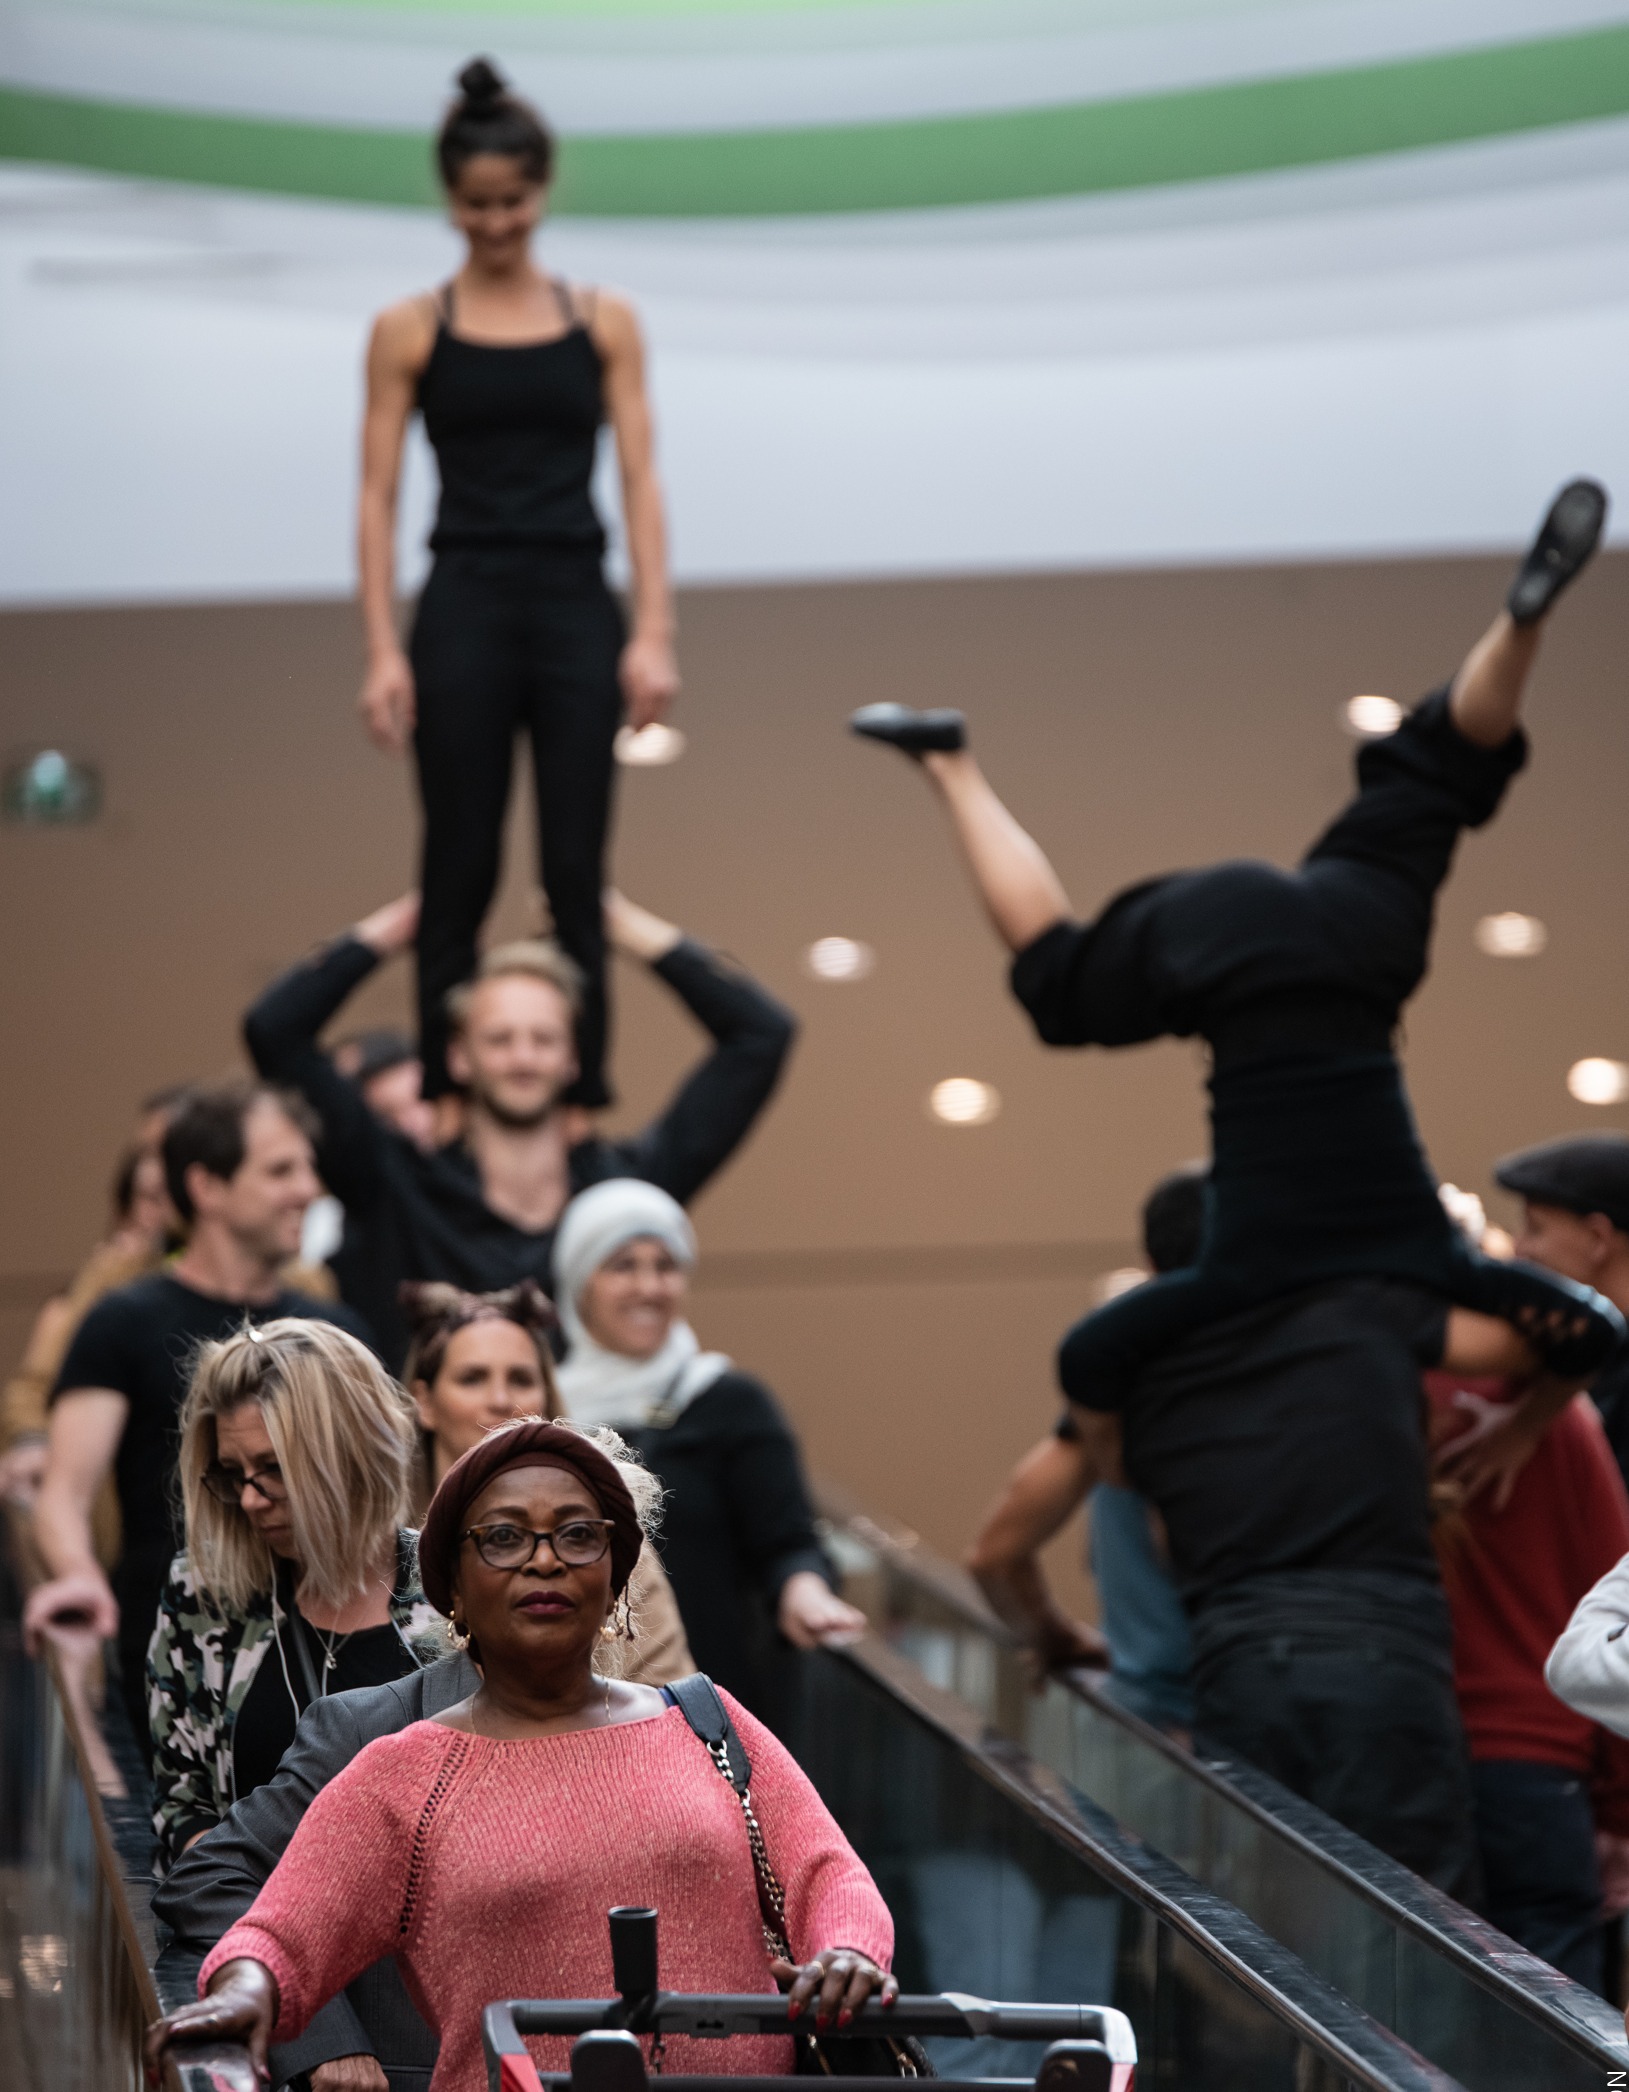 Acrobats dressed in black stand on each others shoulders and do handstands on a shopping centre escalators as others continue with their shopping.